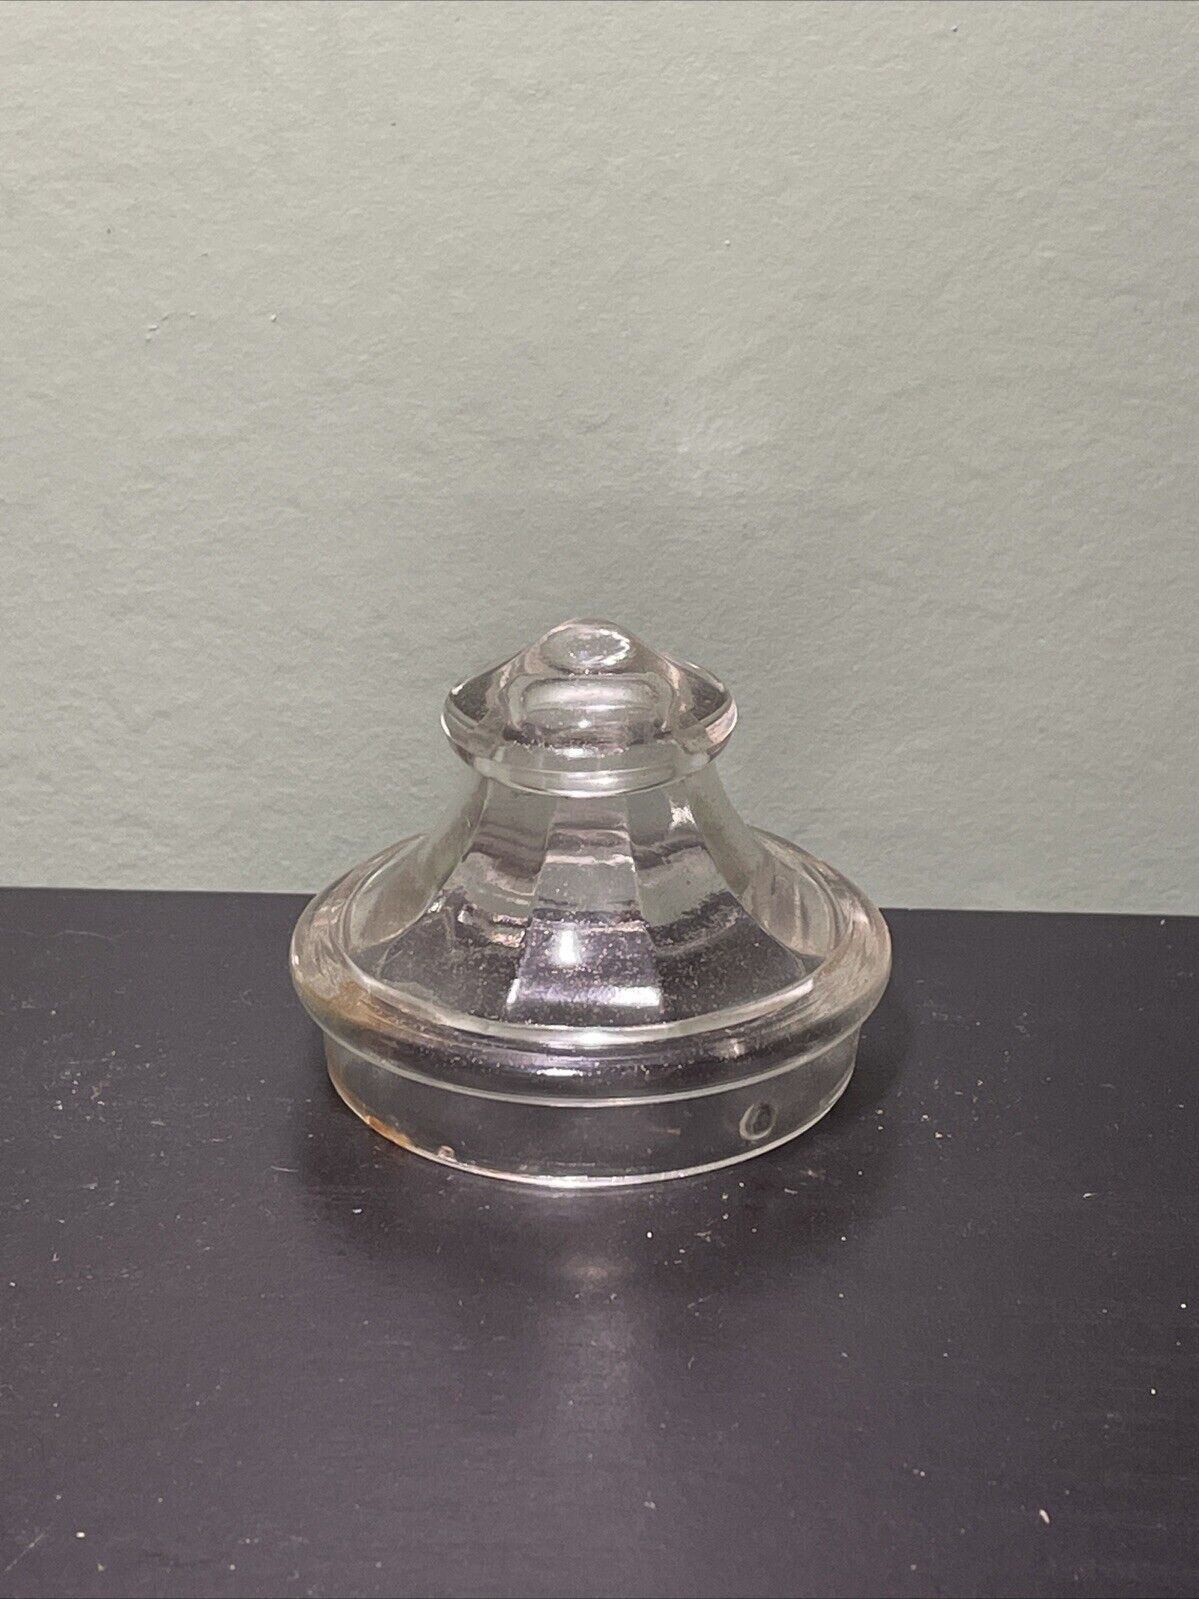 Vintage Small Glass Lid Apothecary Or Candy Dish - 2” Opening - SEE PICTURES